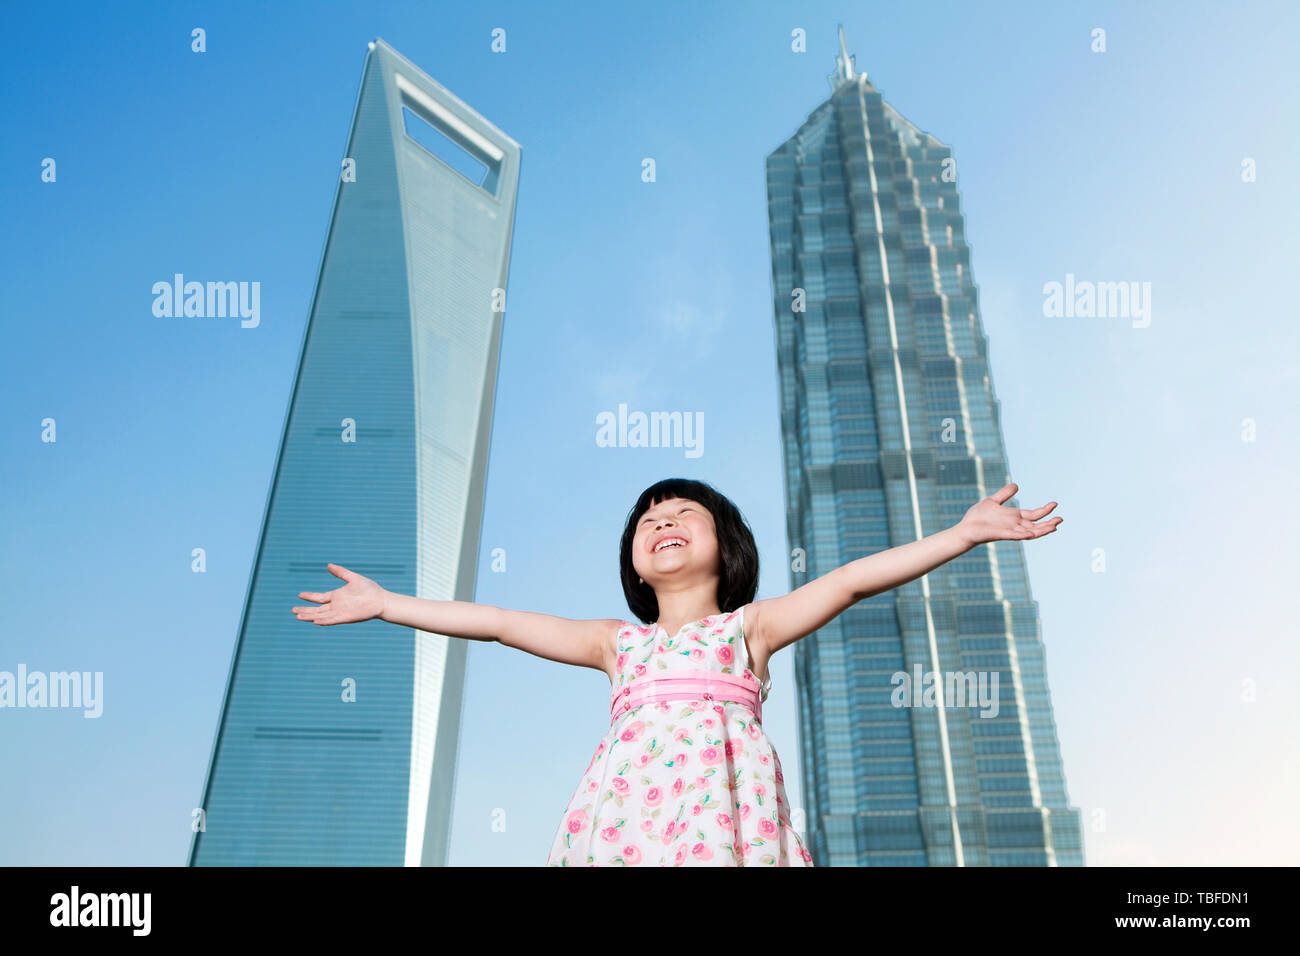 a girl playing outdoors Stock Photo